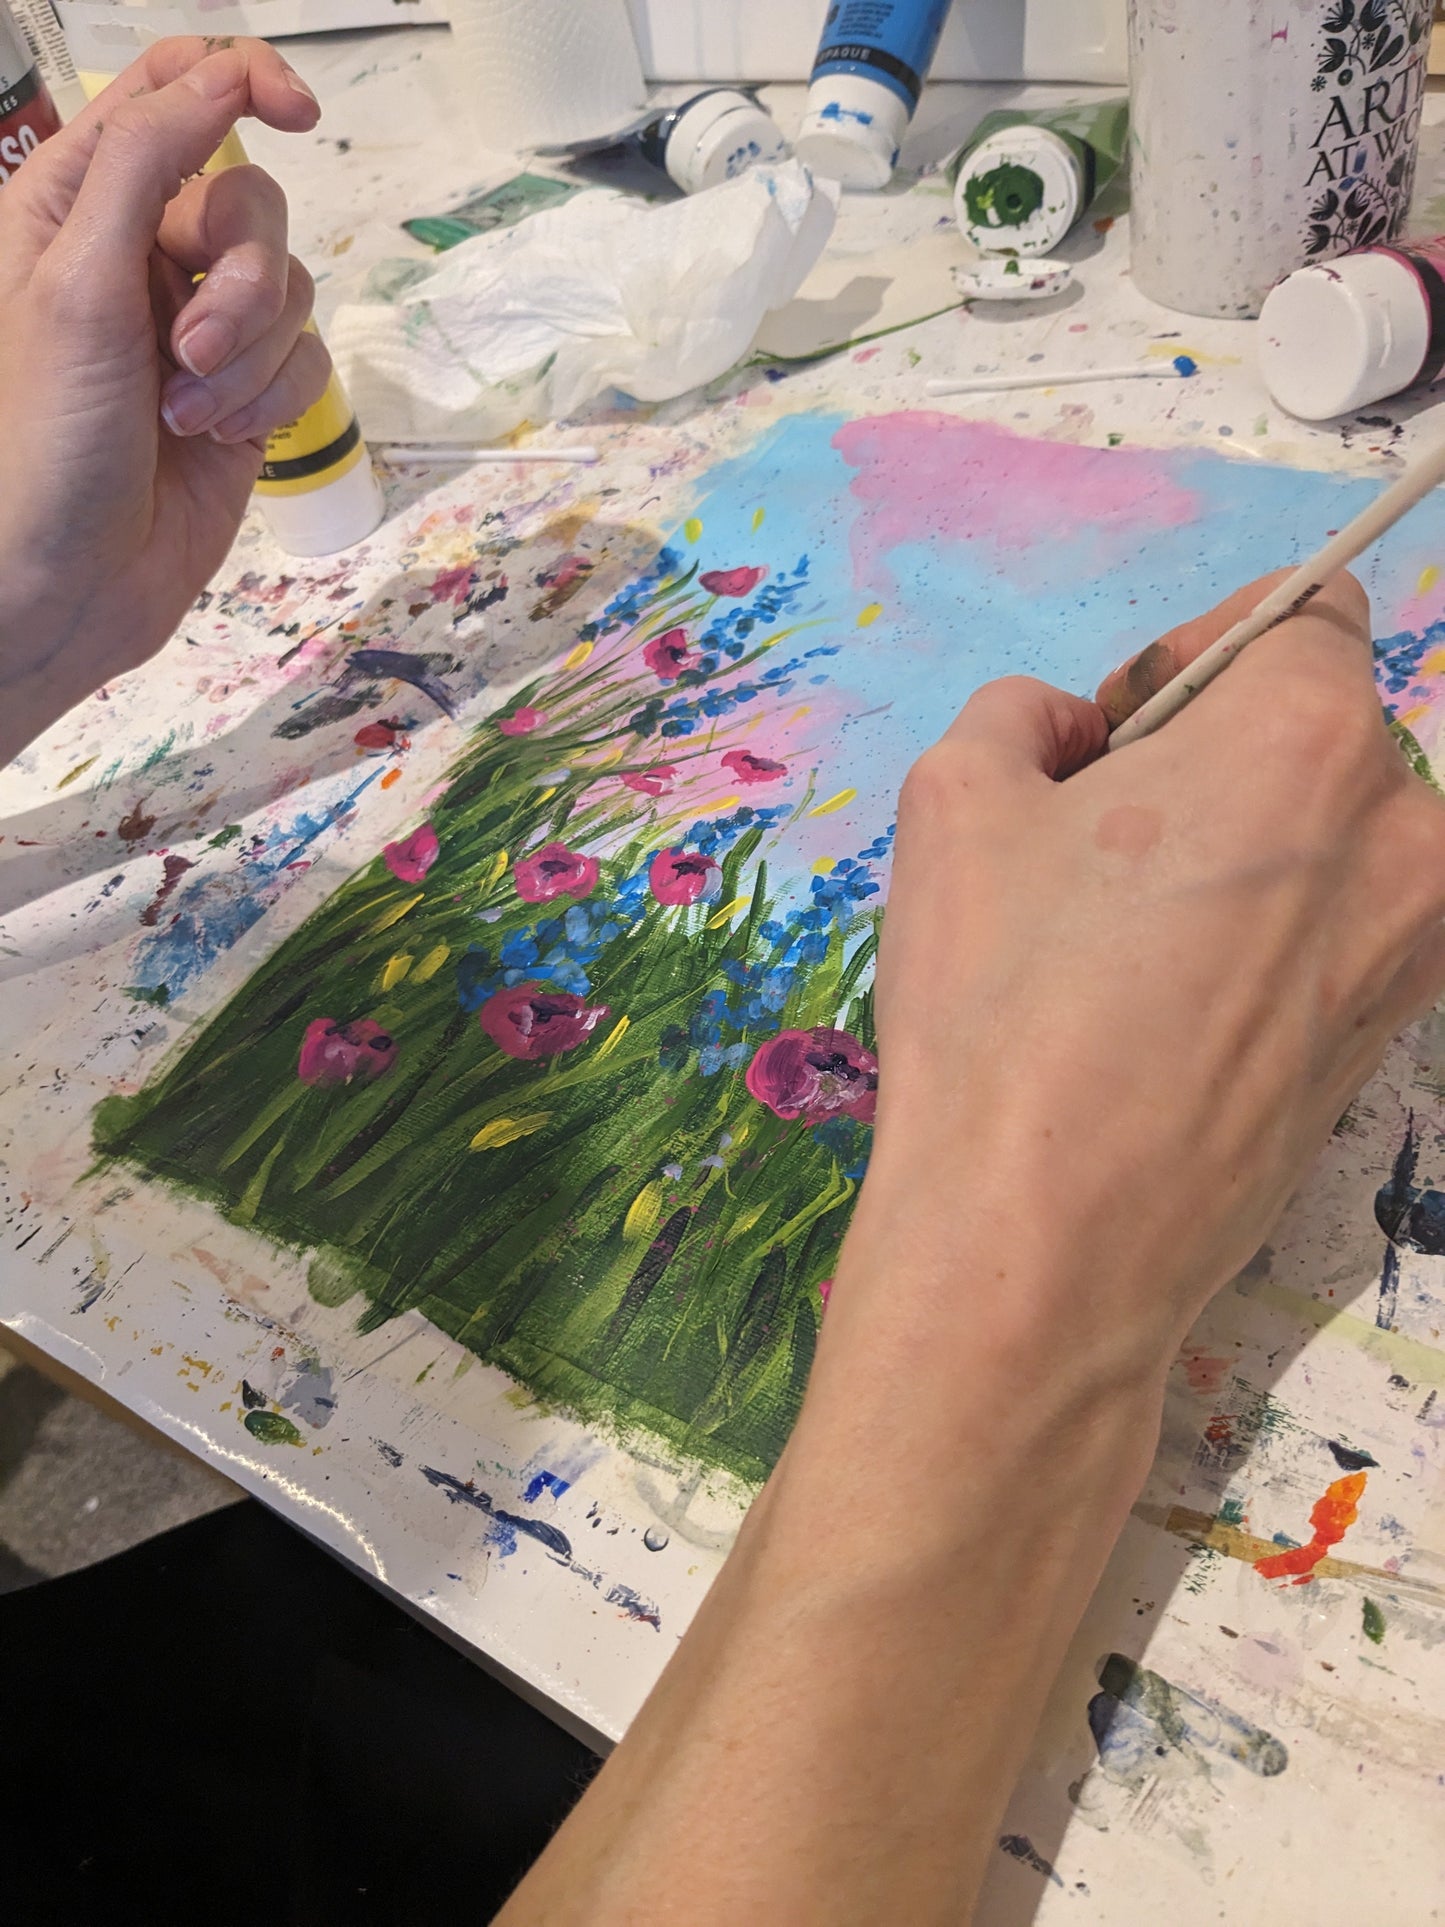 WILDFLOWER MEADOW - Painting Workshop at The Catcher in The Rye Pub, Finchley, London - 28th NOVEMBER 2023